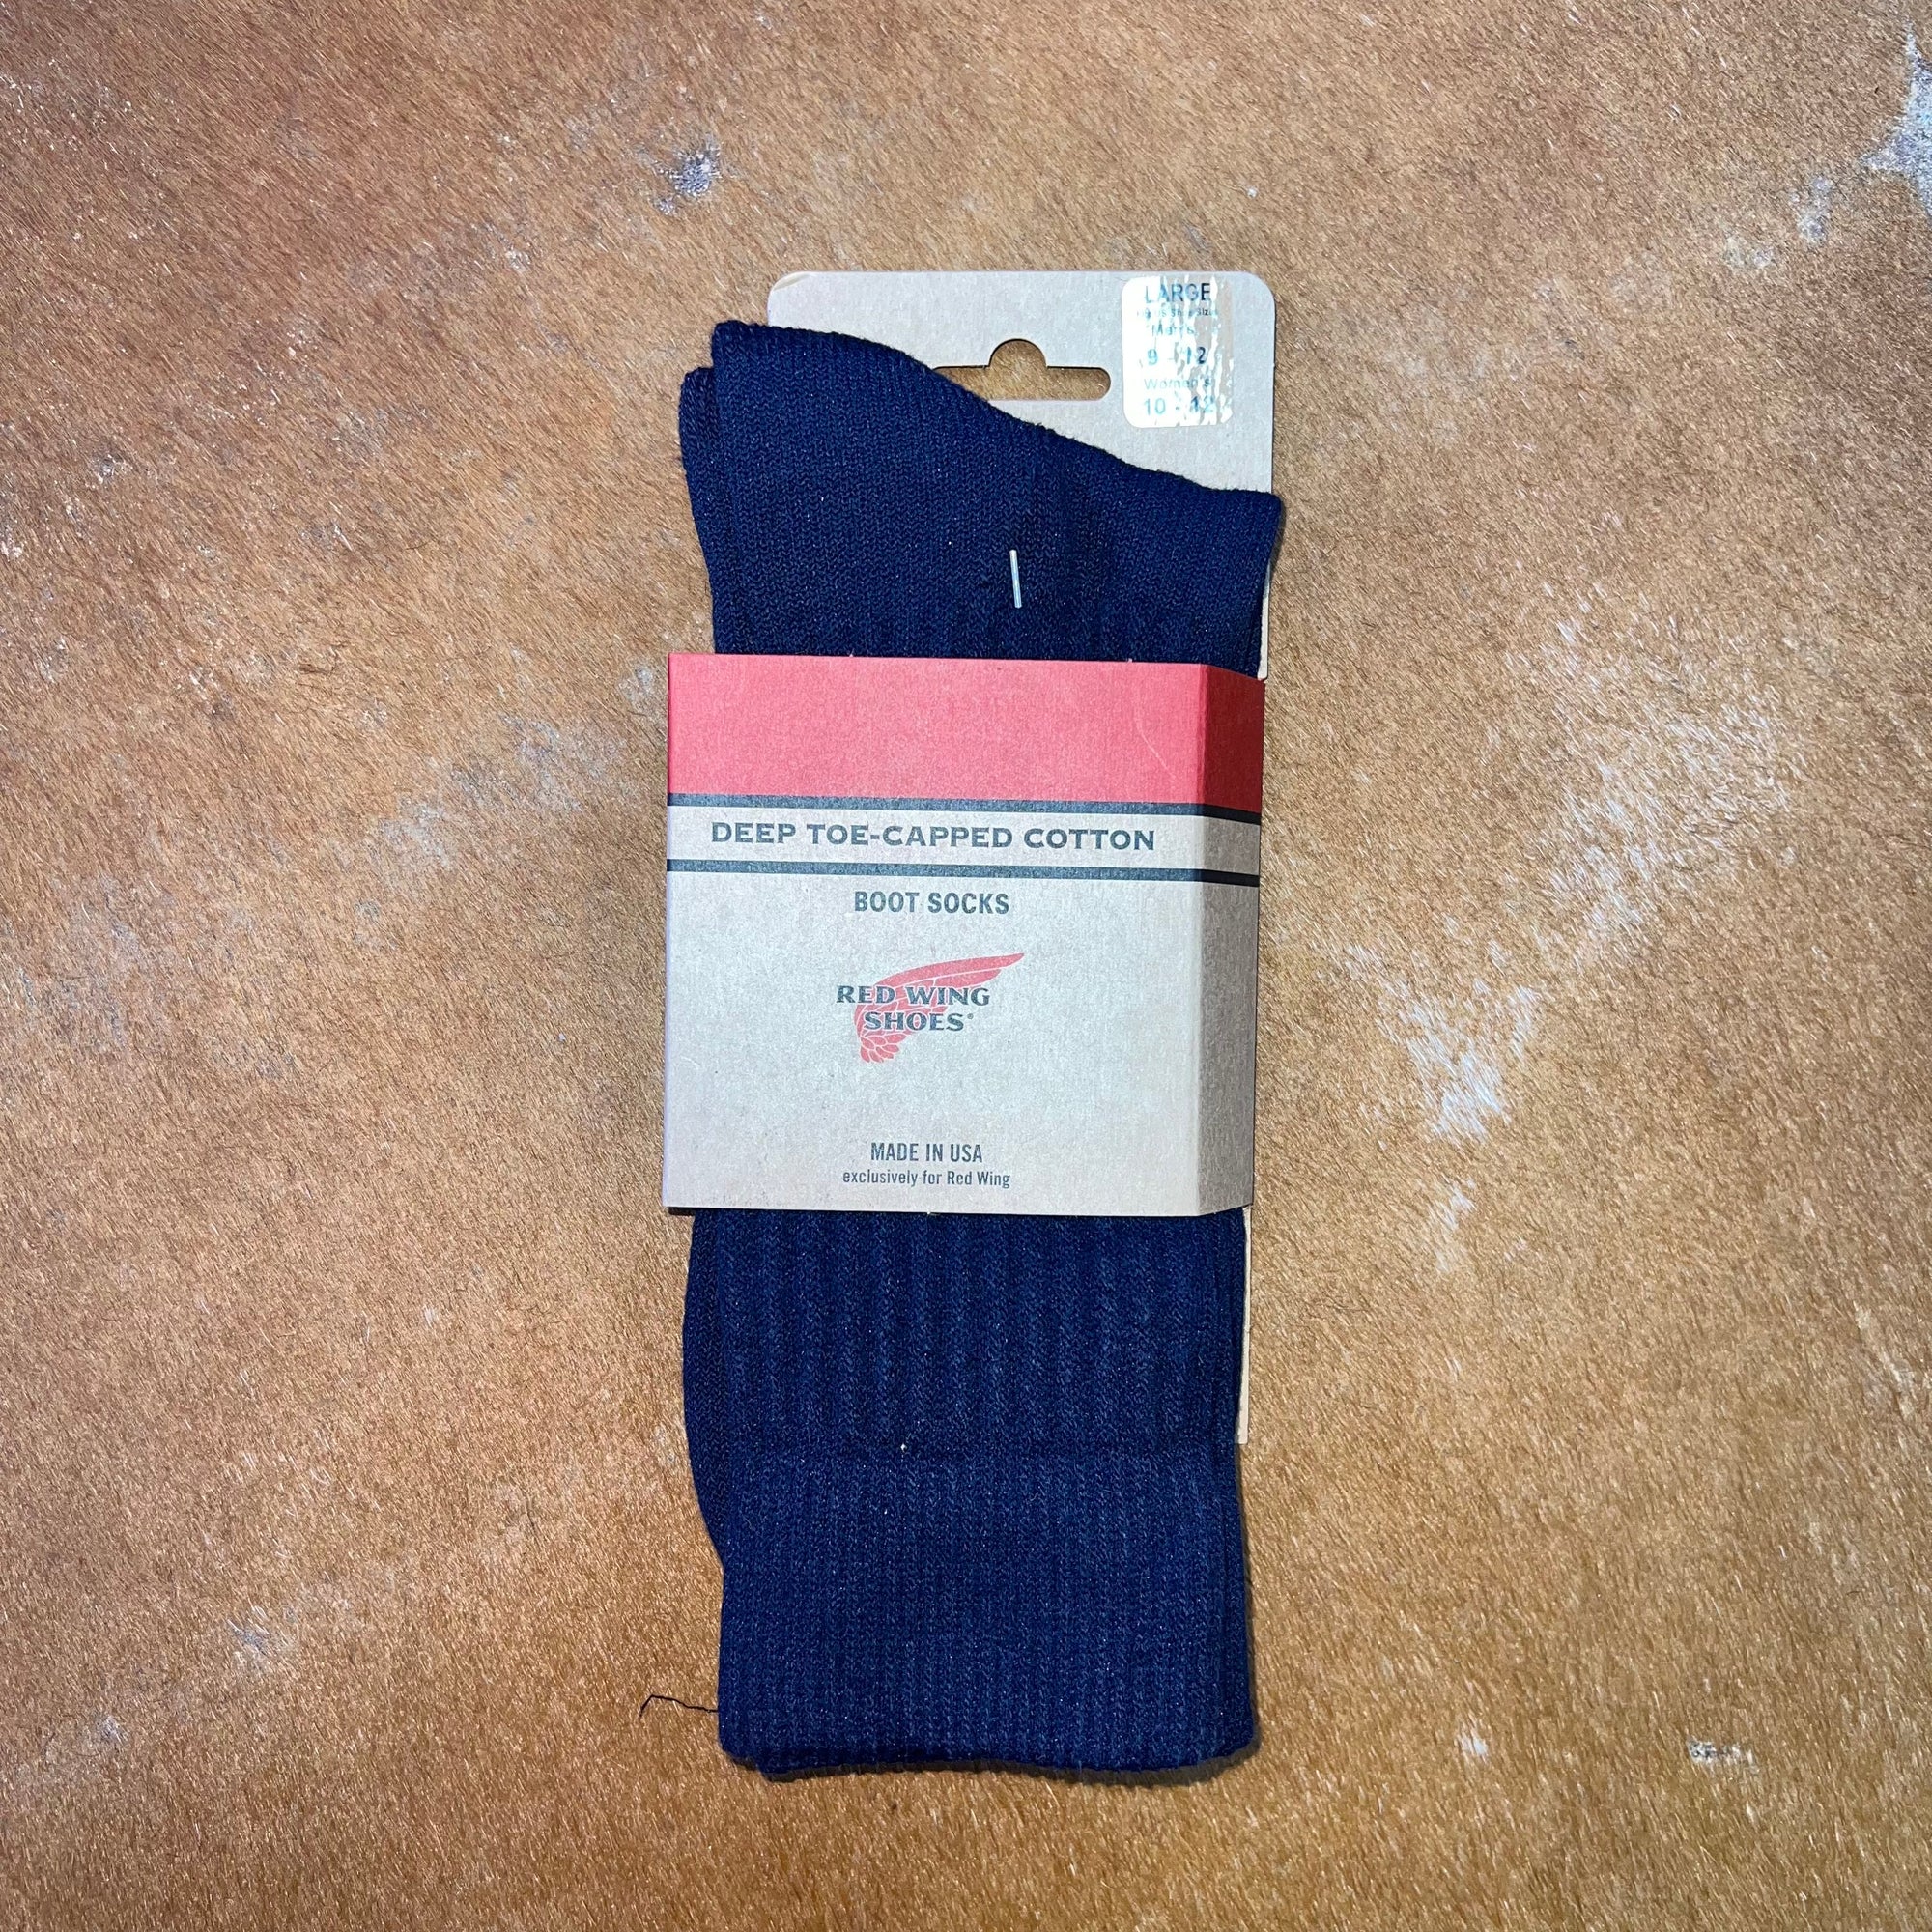 RED WING DEEP TOE-CAPPED COTTON SOCKS